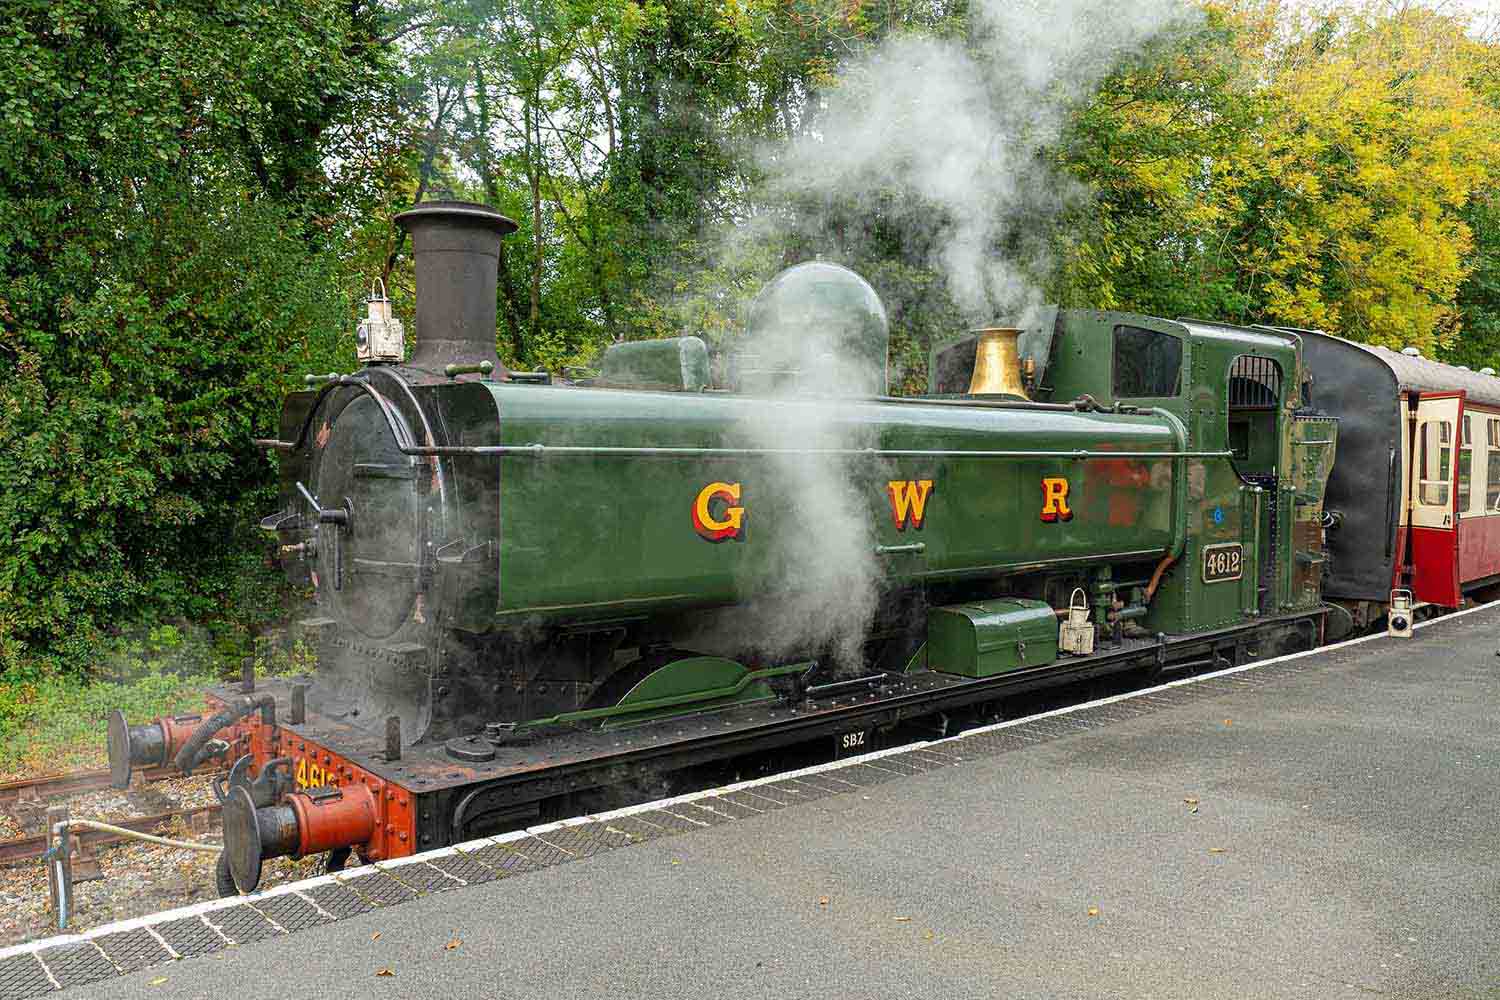 Side view of the green steam locomotive